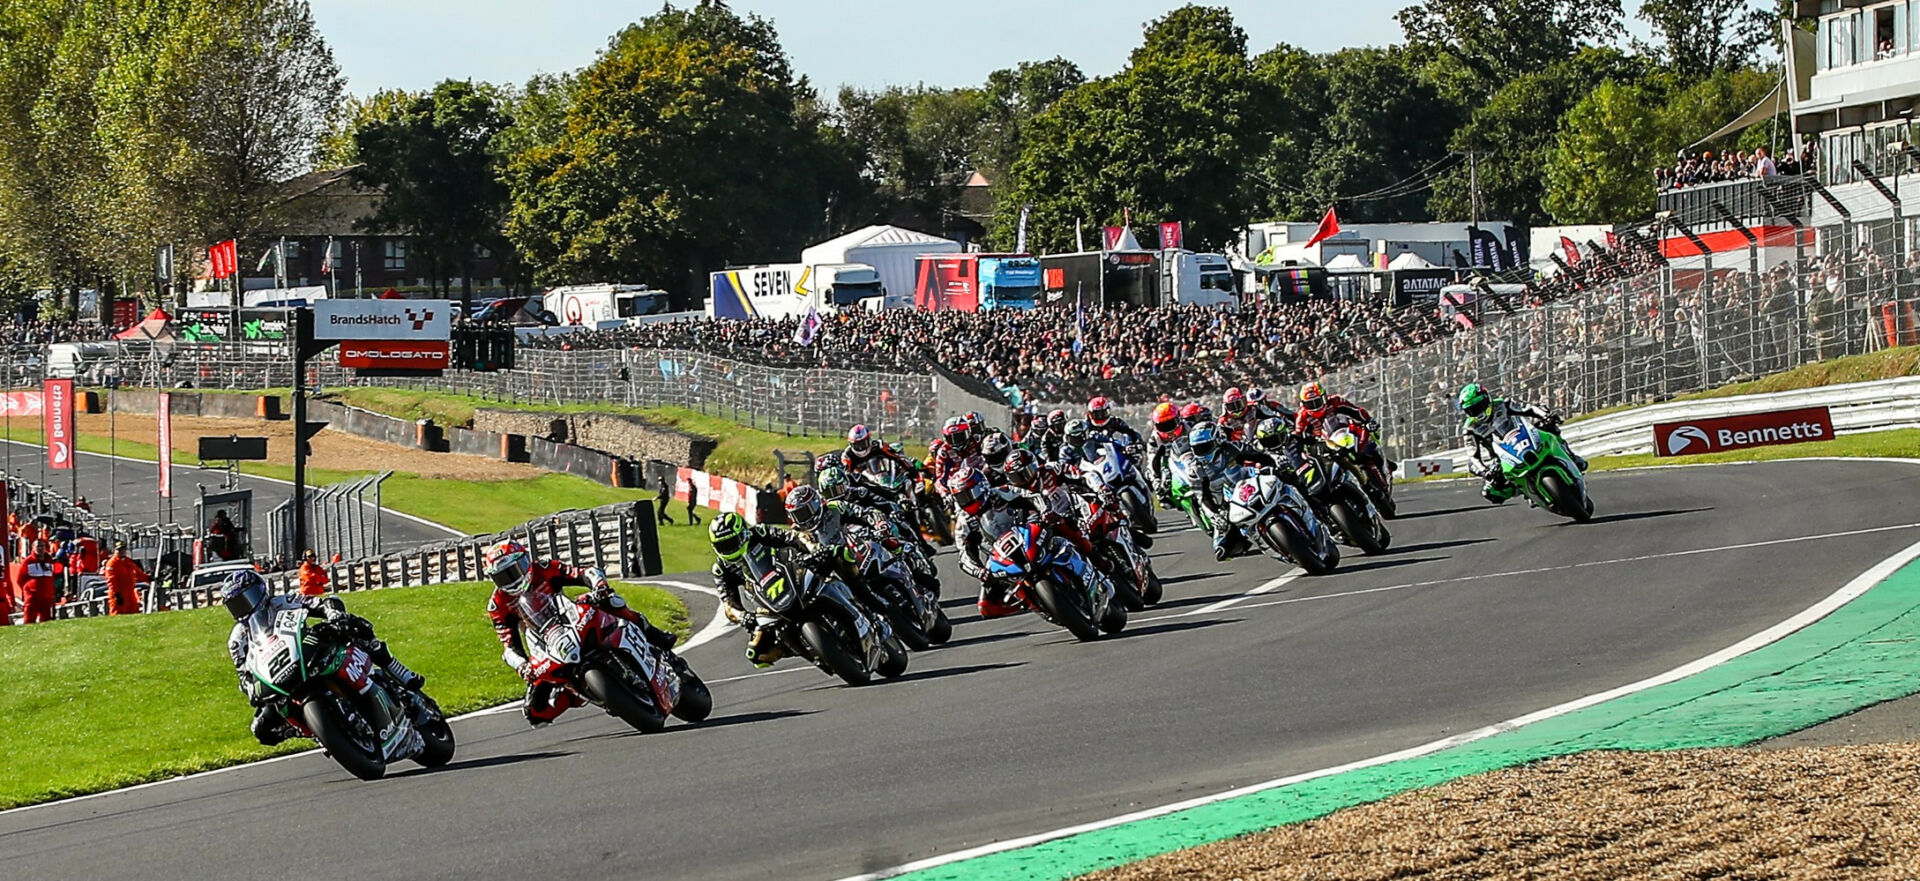 The start of a race at Brands Hatch during the 2023 British Superbike season with Jason O'Halloran leading the field. Photo courtesy MSVR.